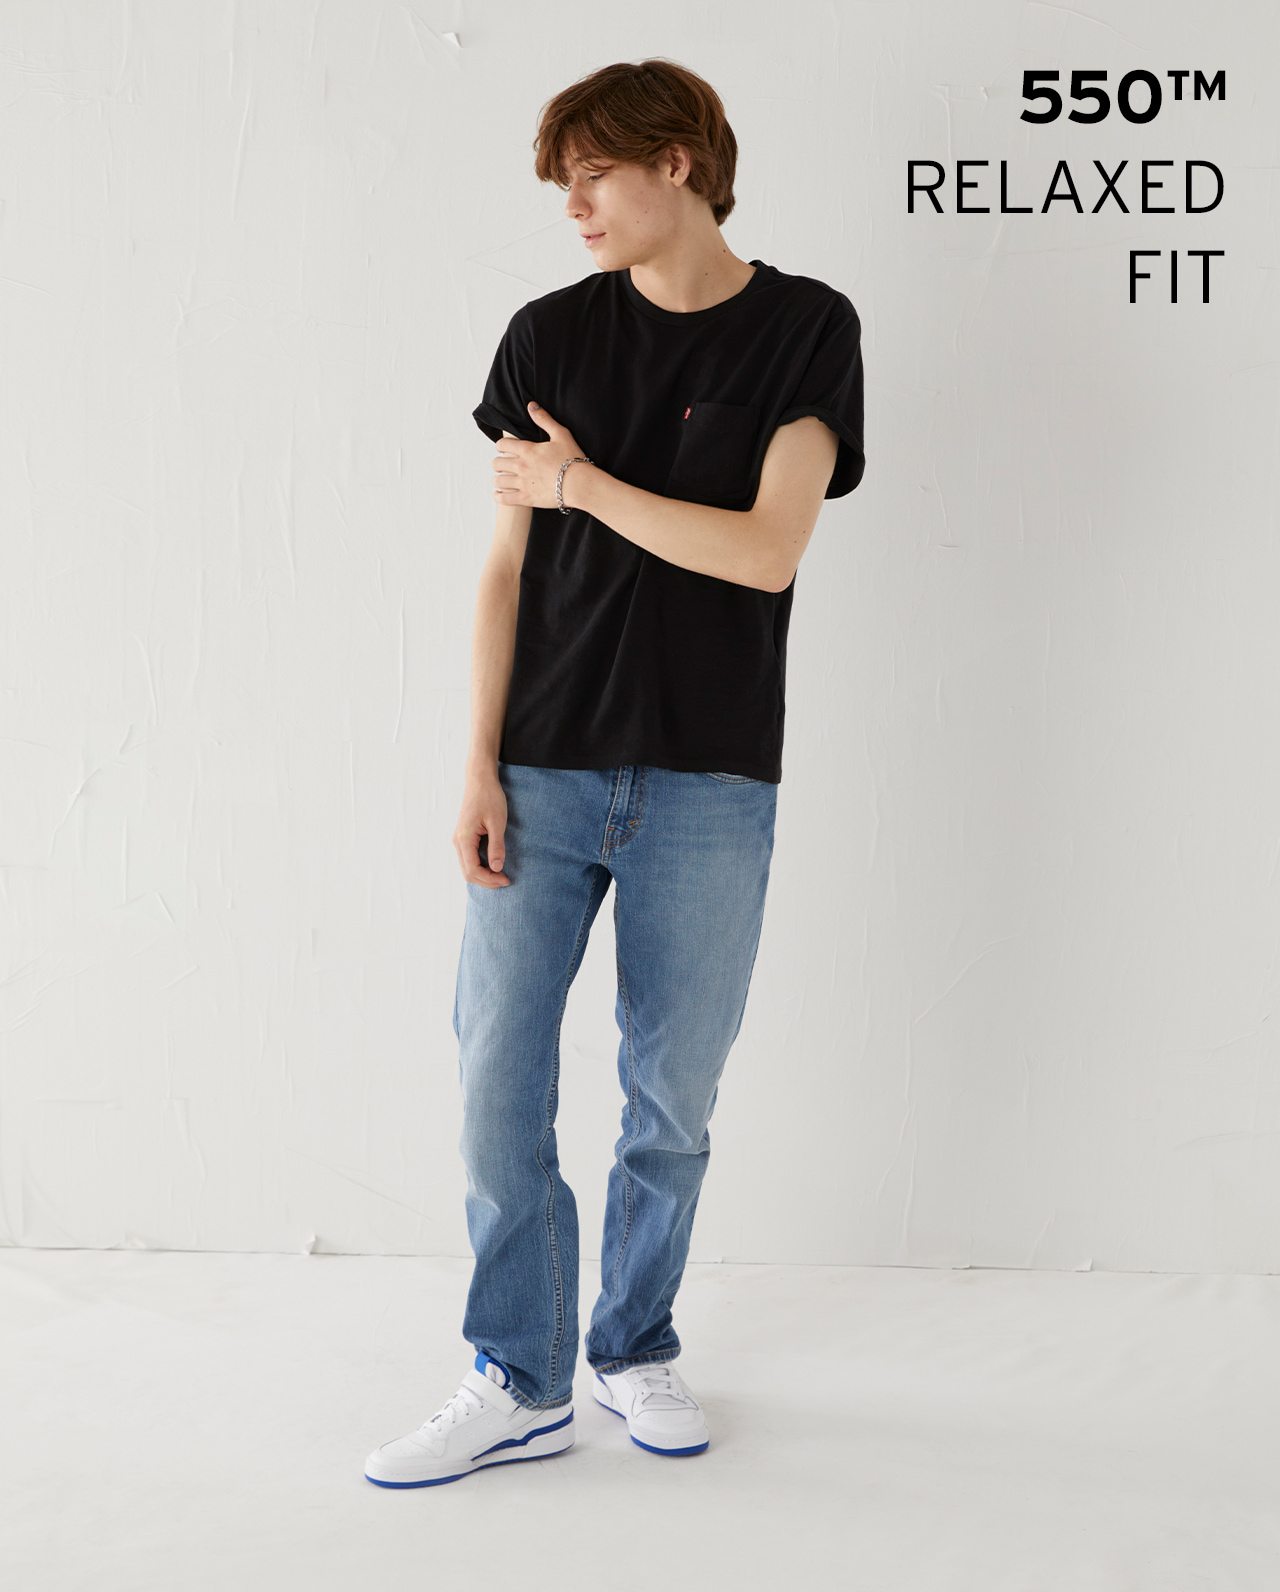 550™ RELAXED FIT: SHOP NOW